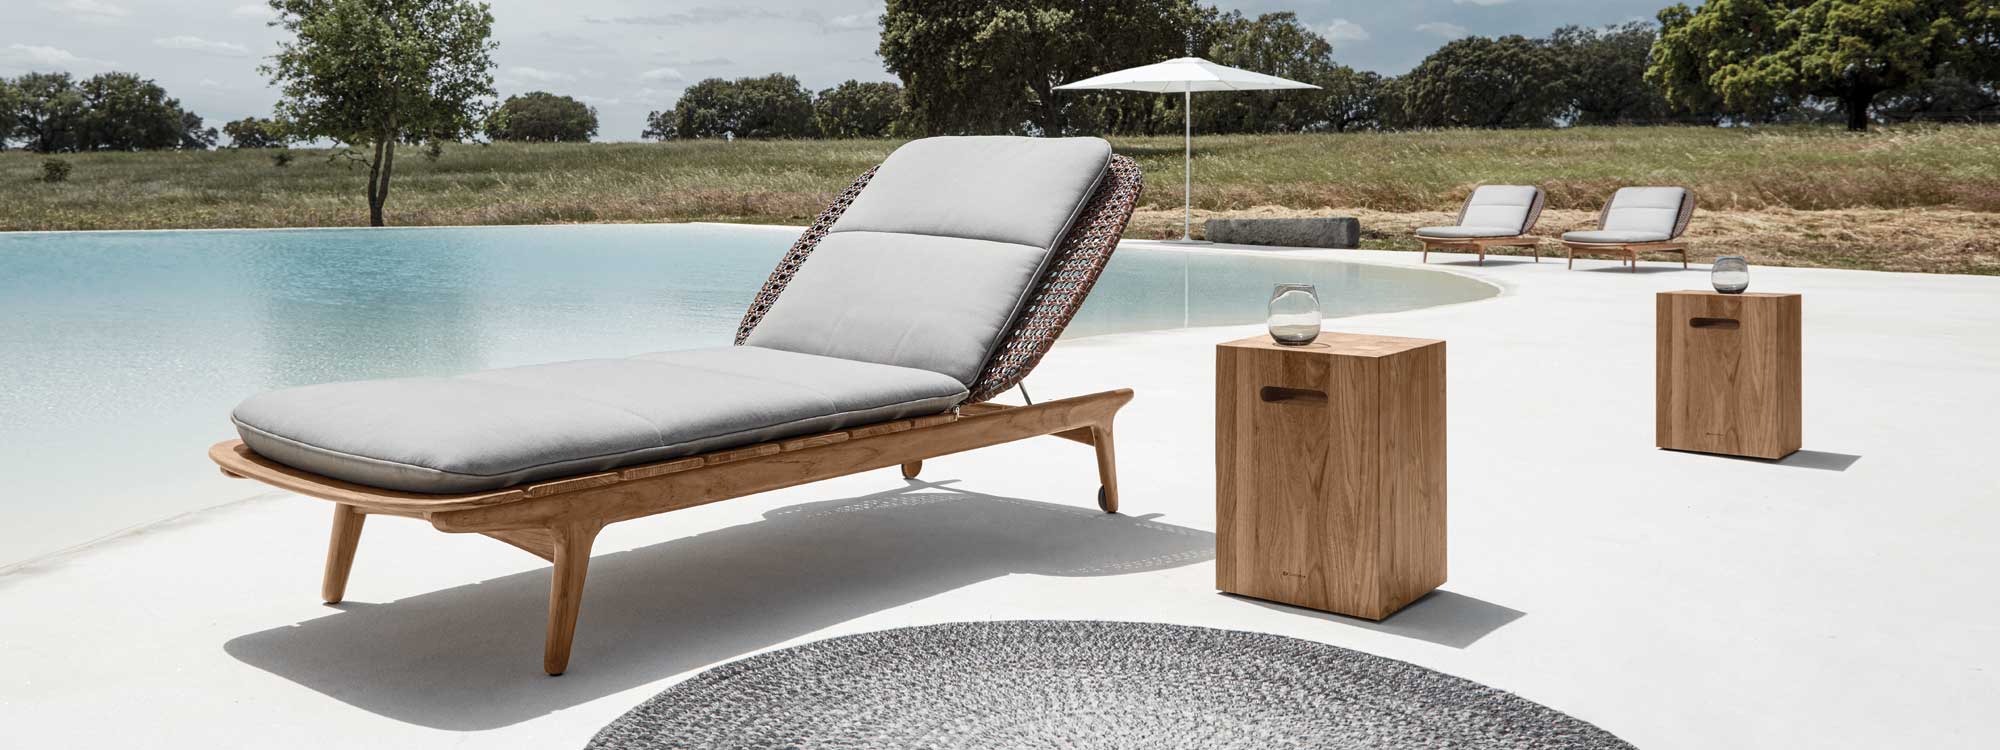 Image of Gloster Kay teak & wicker sunbeds together with Block side tables around a large swimming pool